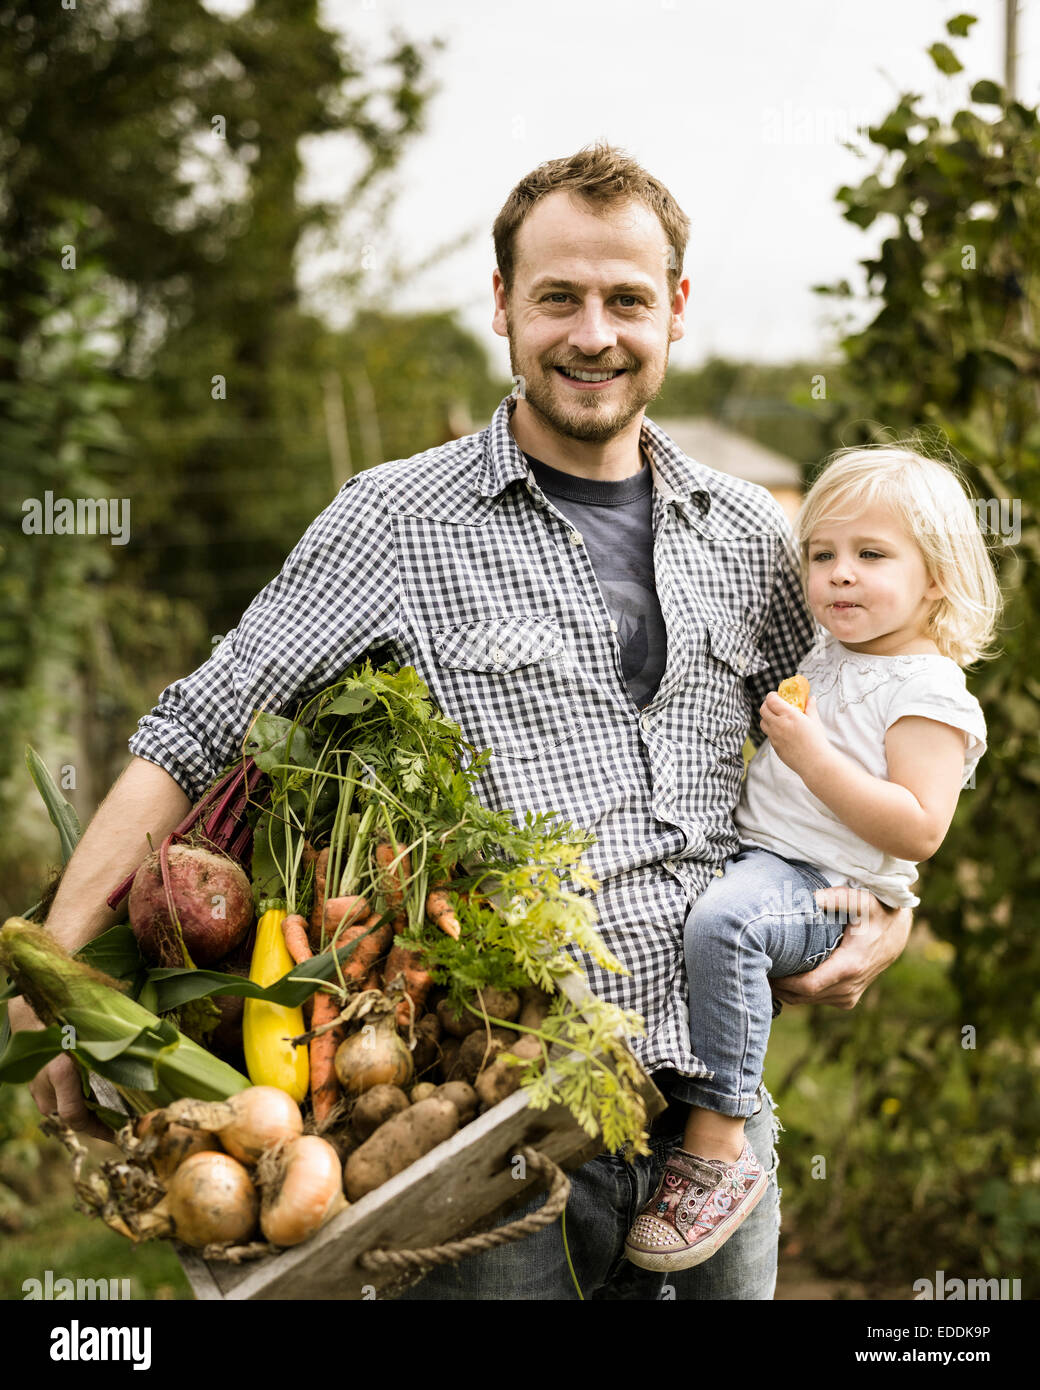 Man standing in his allotment with his daughter, smiling, holding a box full of freshly picked vegetables. Stock Photo